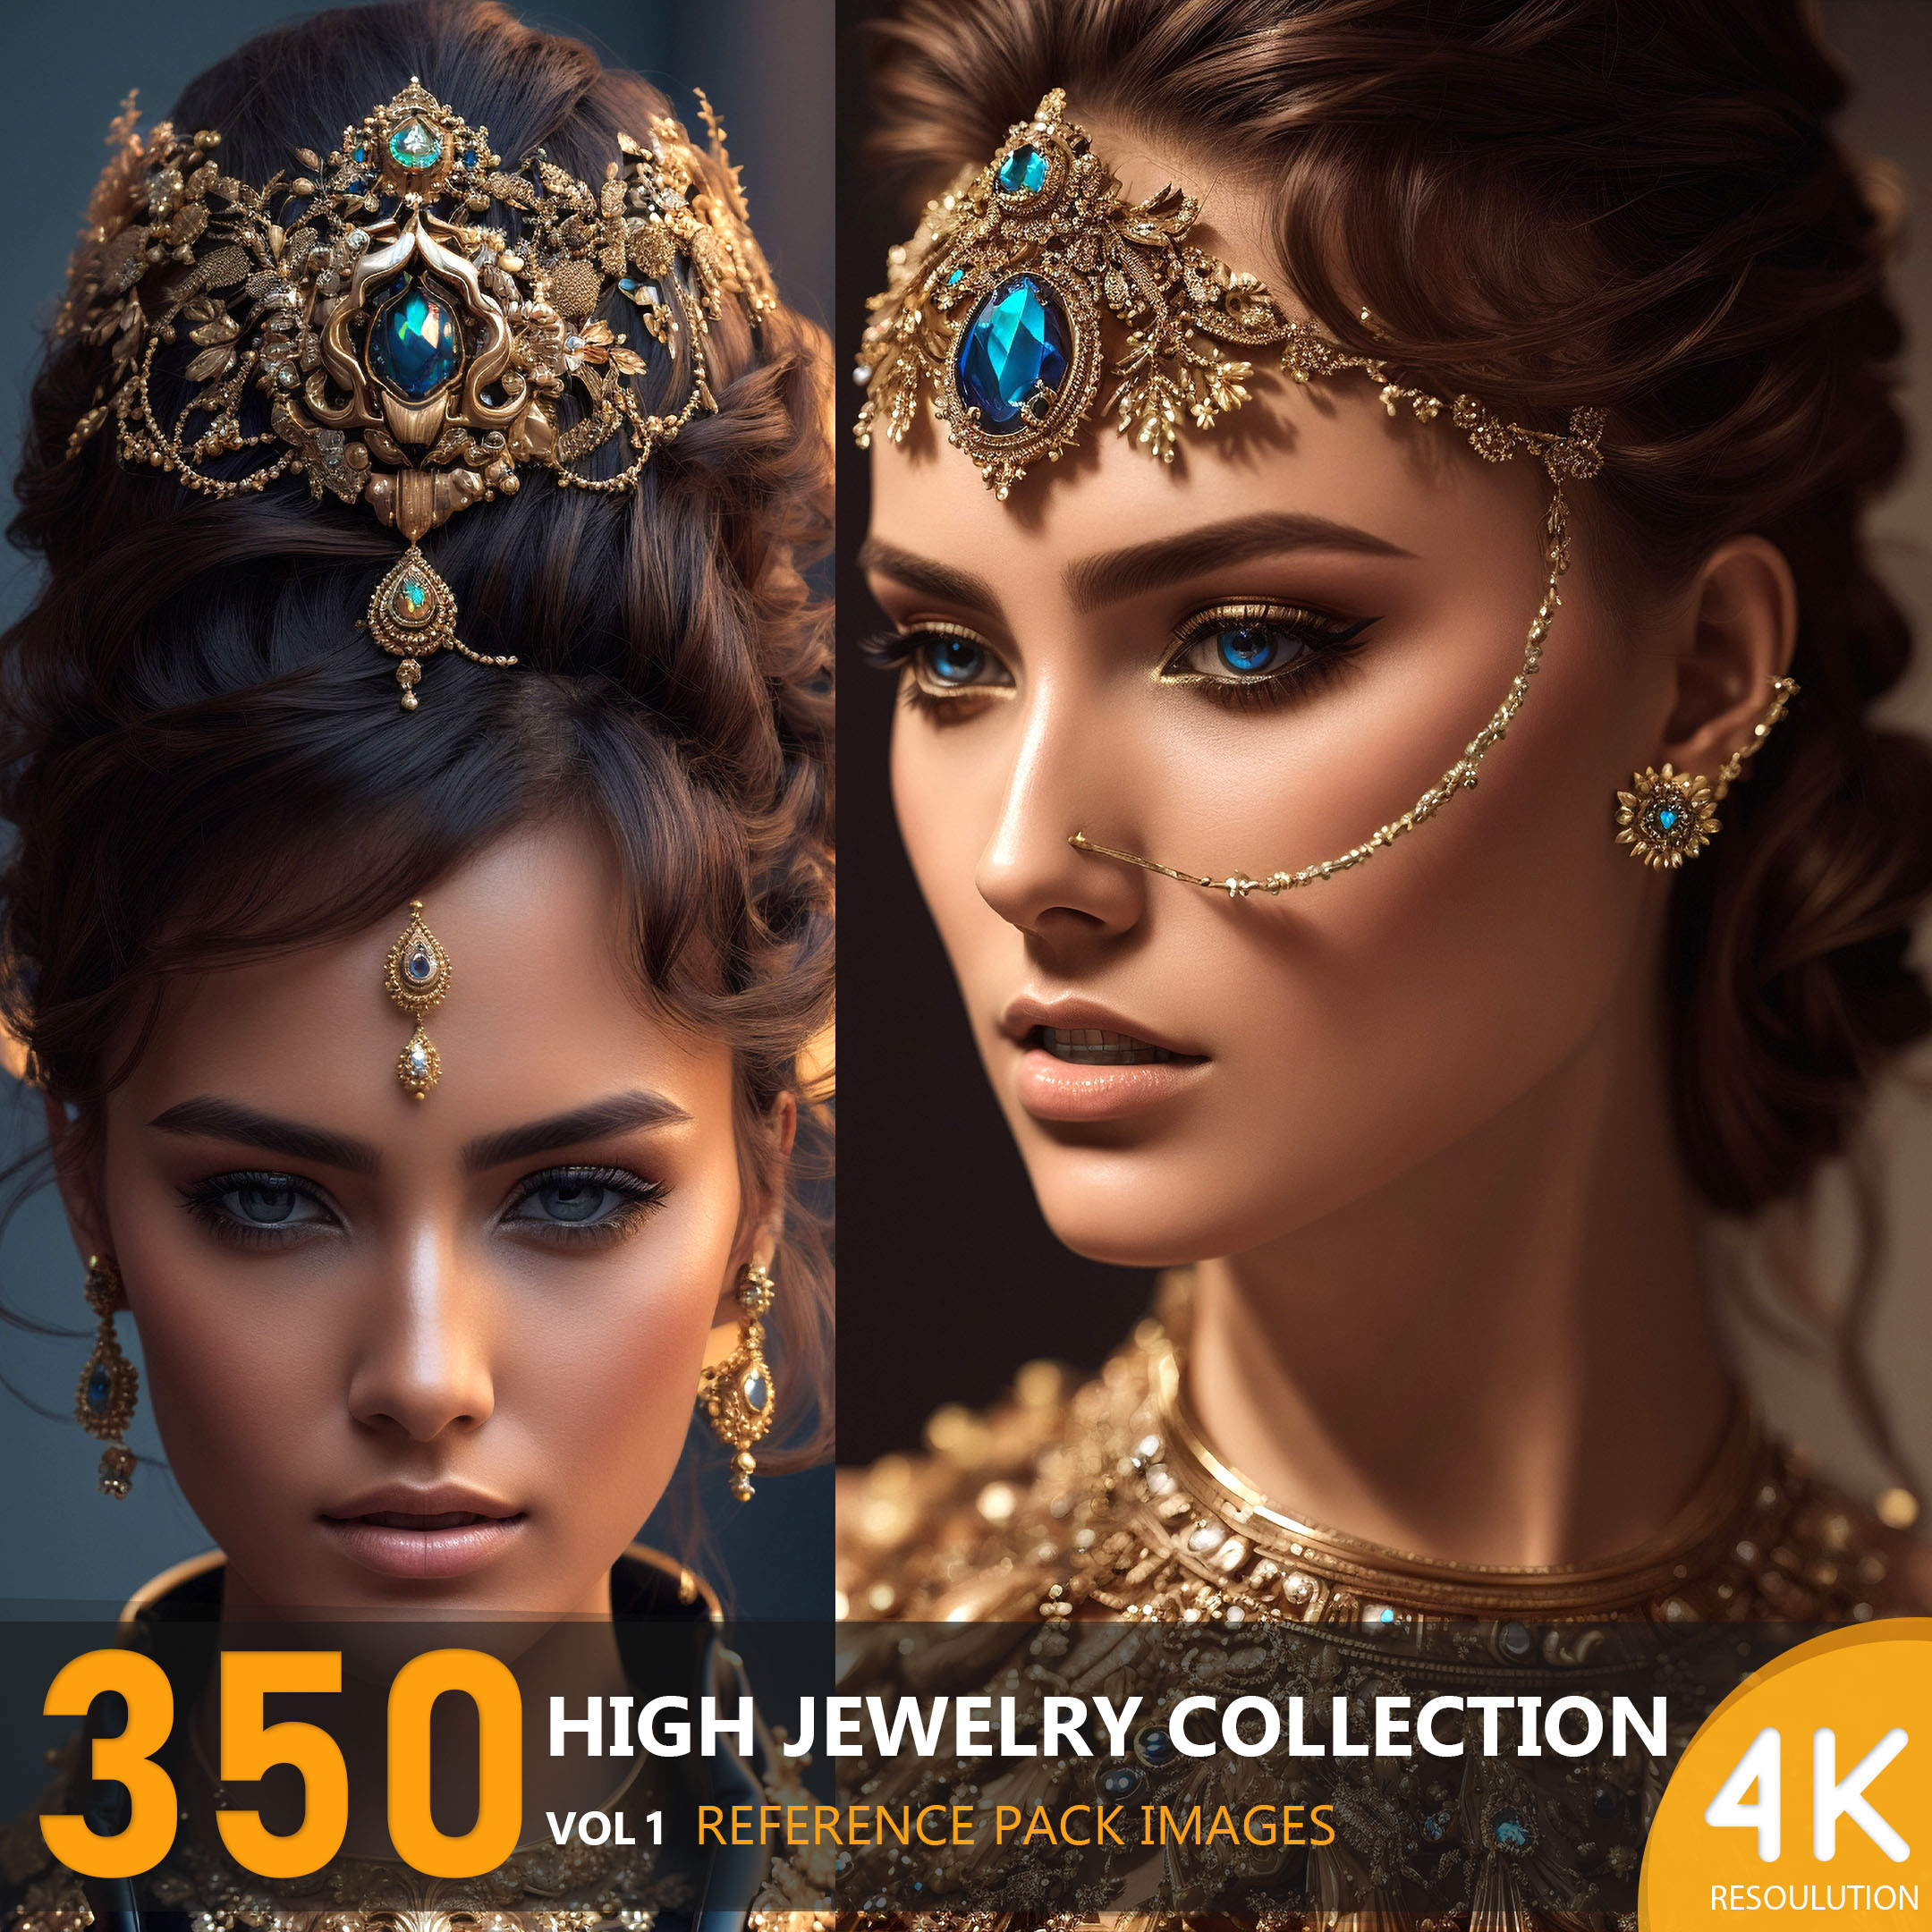 ArtStation - High Jewelry Collection Vol1-4K, Reference pack Images